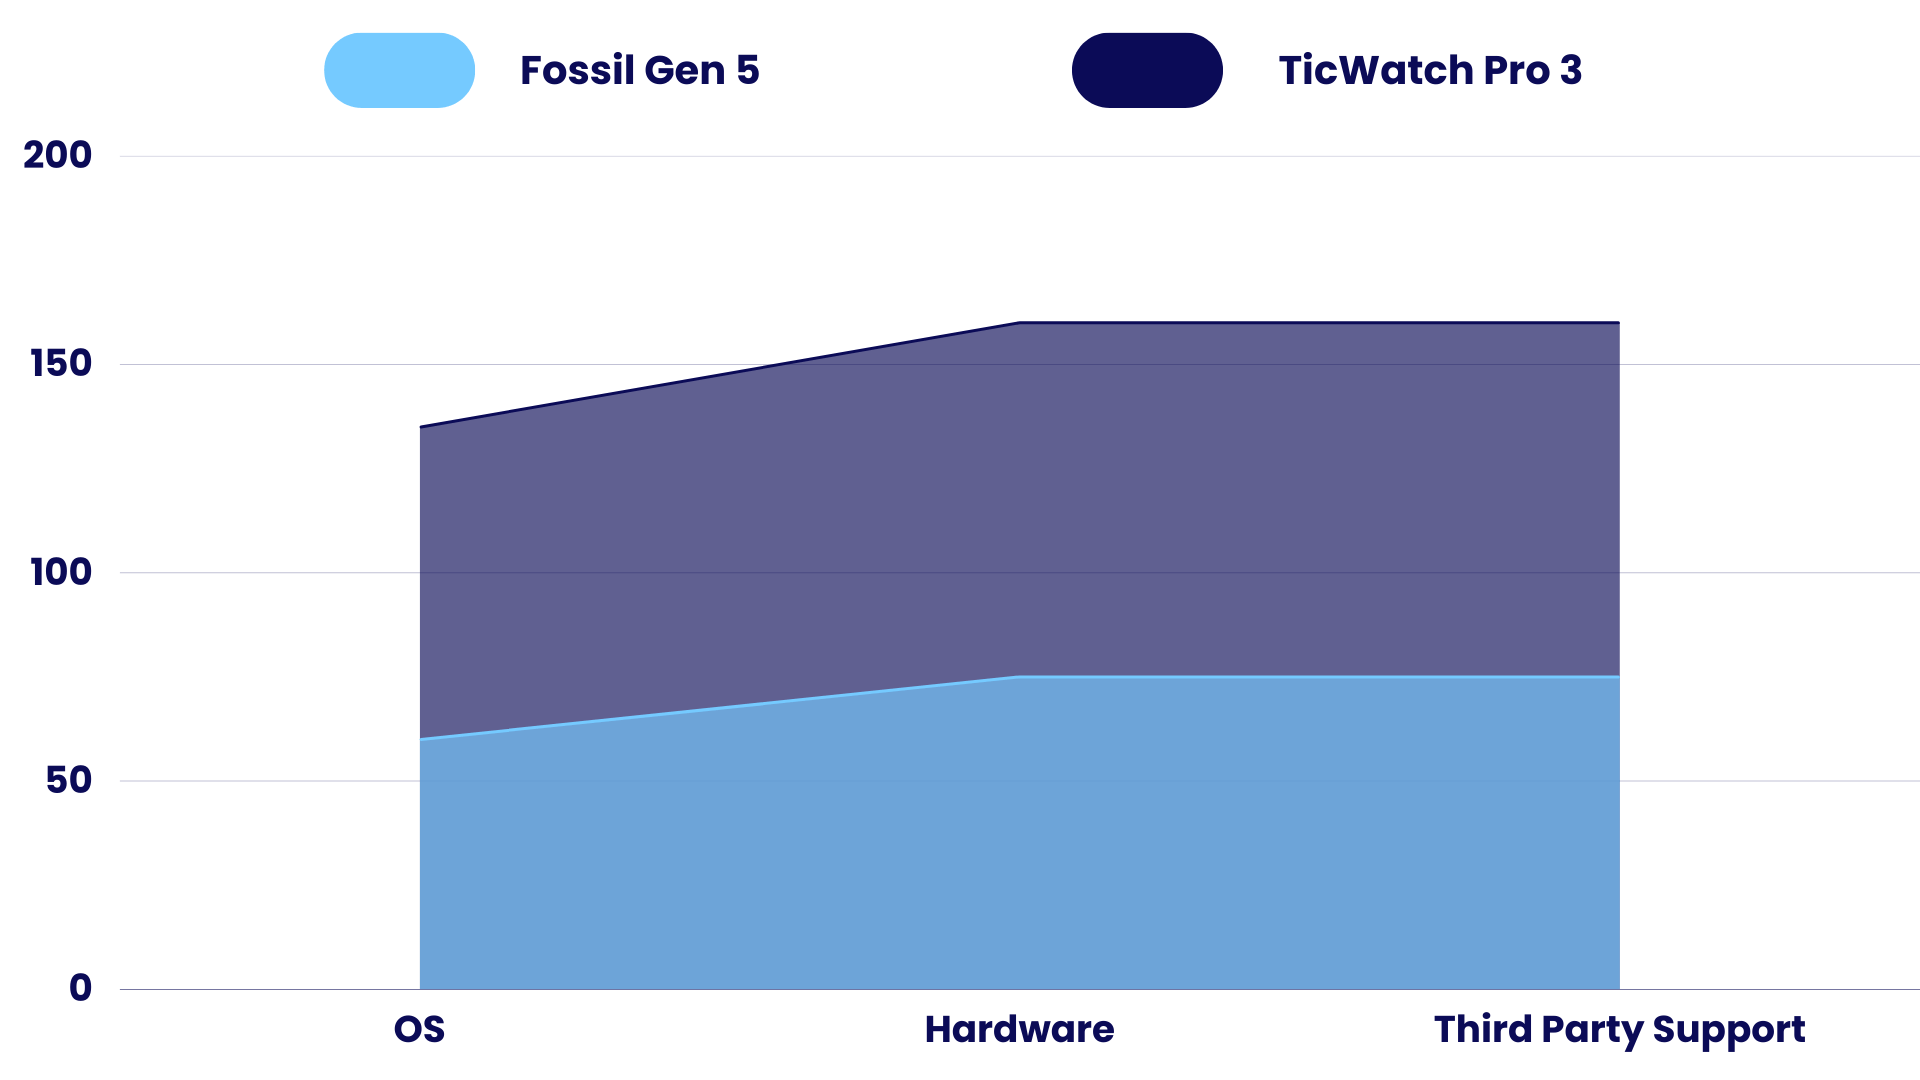 Wits Comparison of Fossil Gen 5 vs TicWatch Pro 3